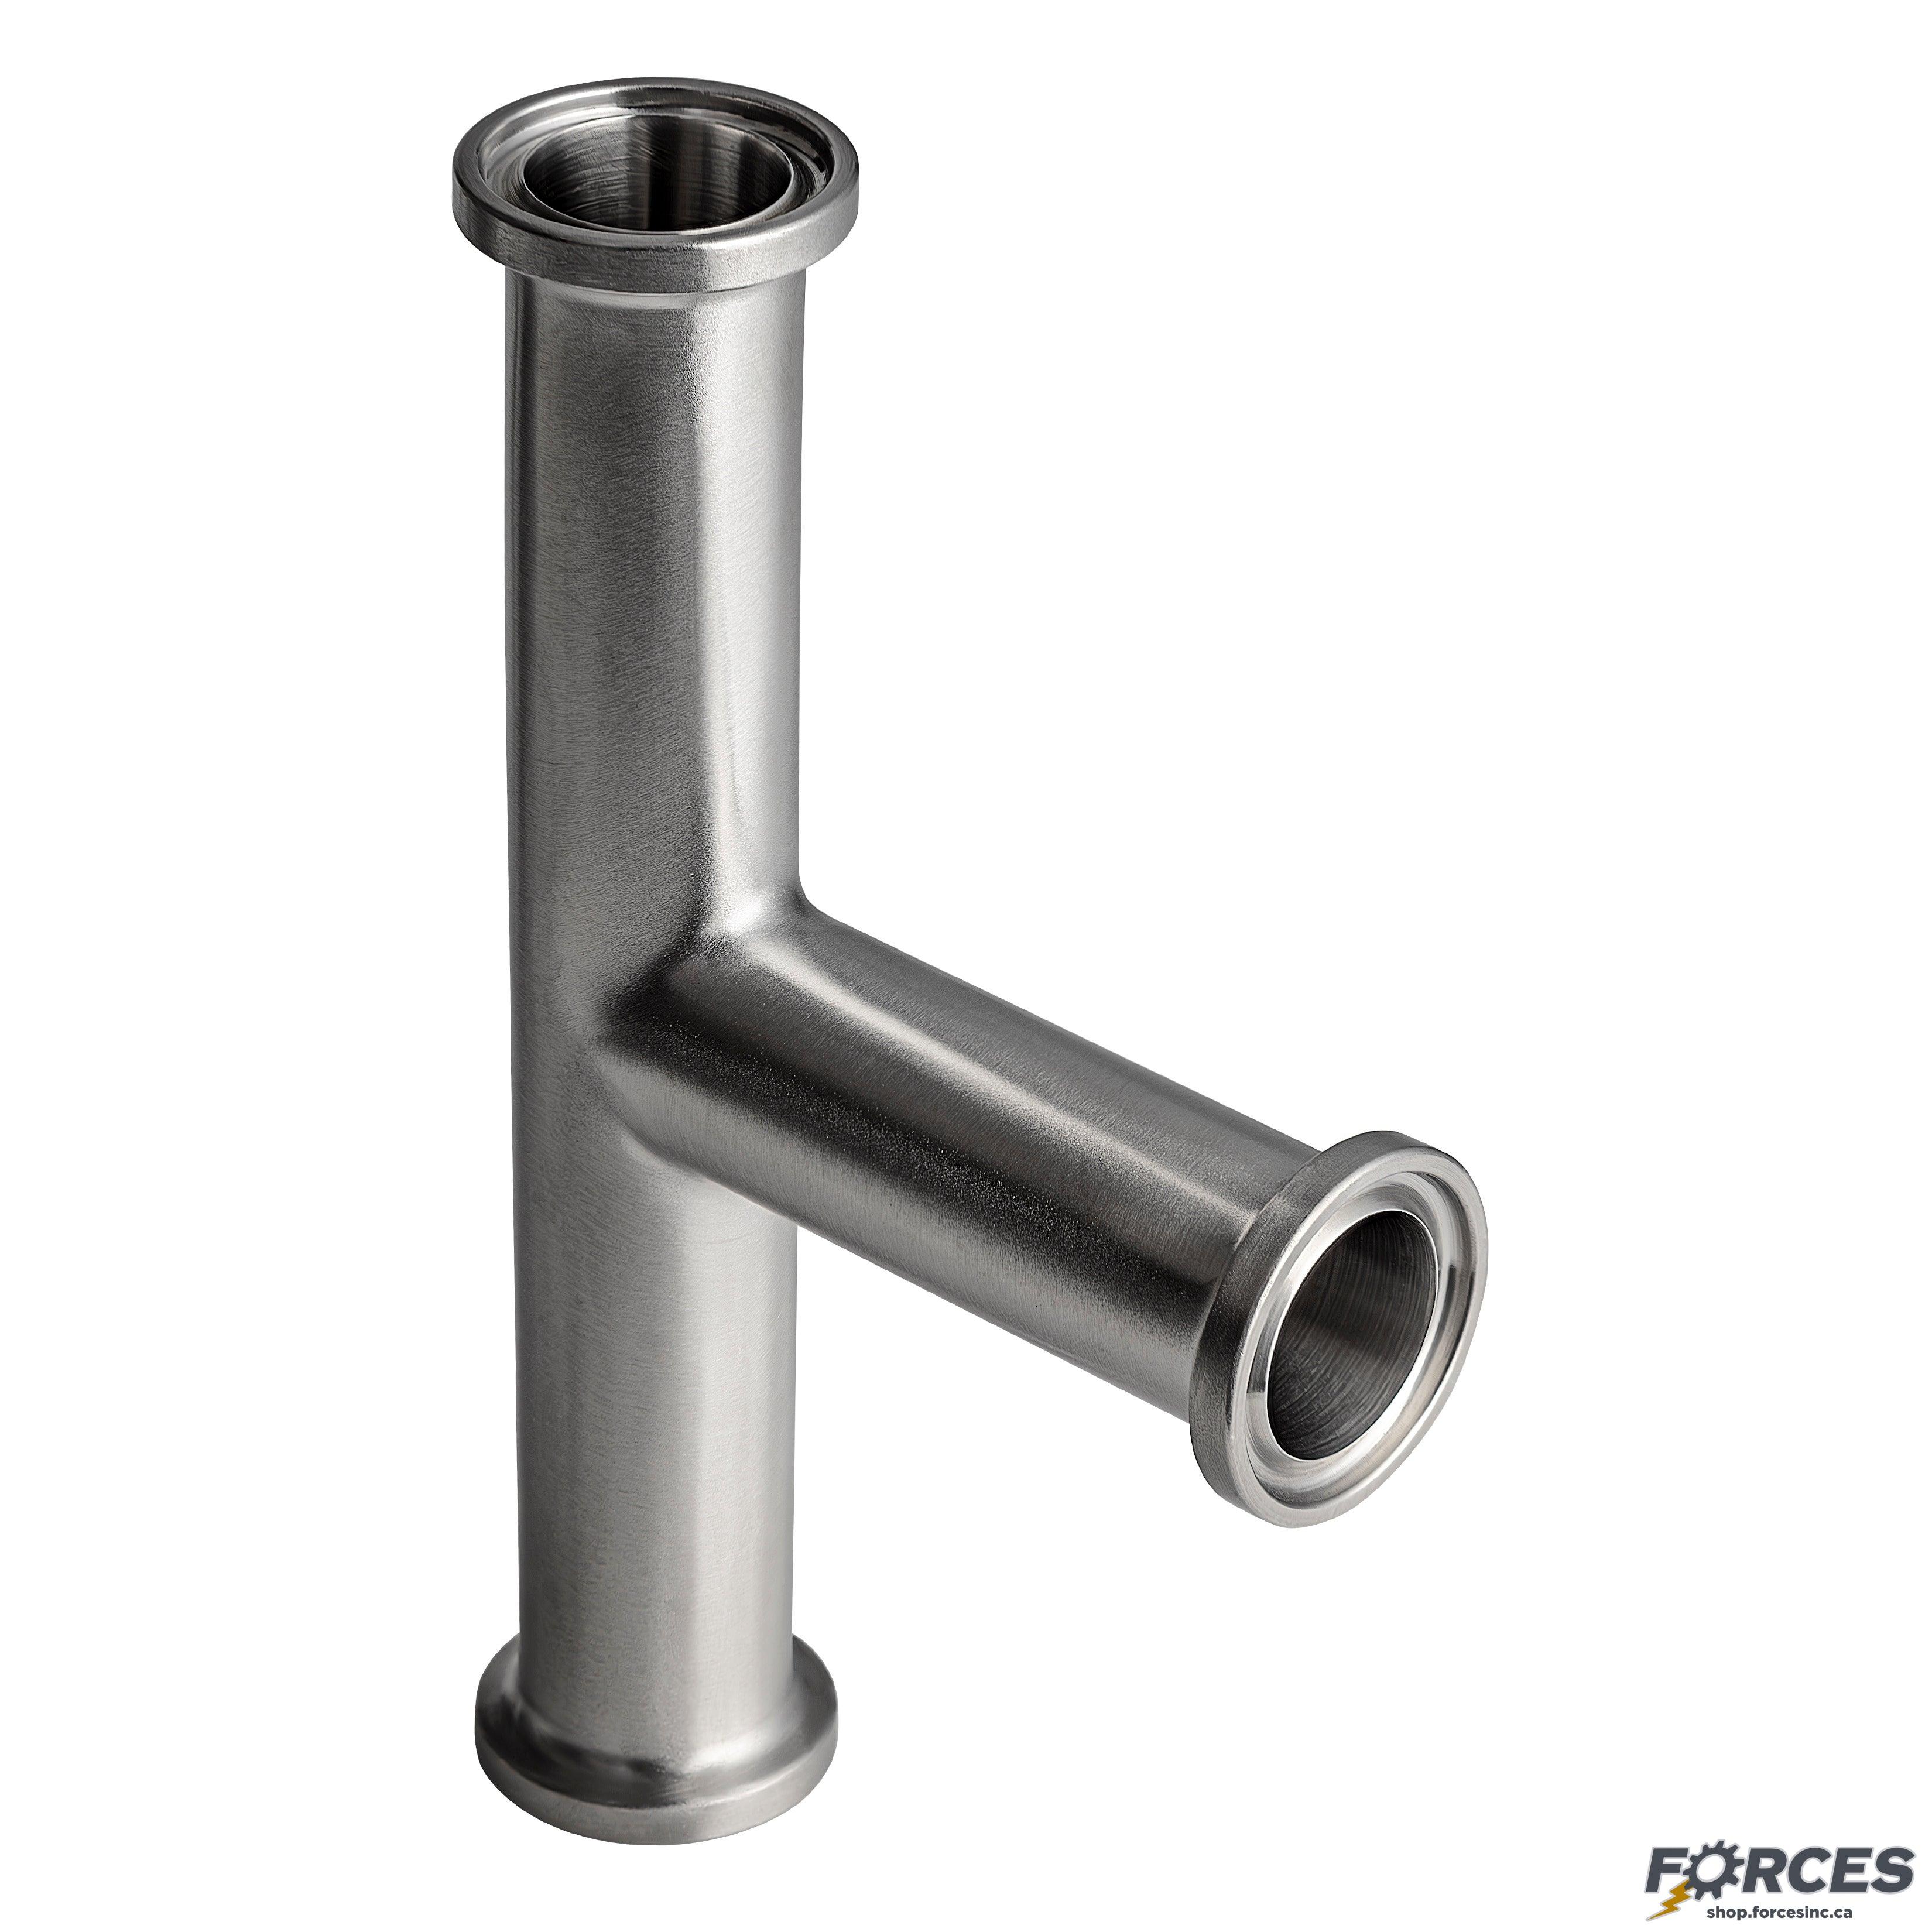 3/4" Tri-Clamp Tee - Stainless Steel 316 - Forces Inc